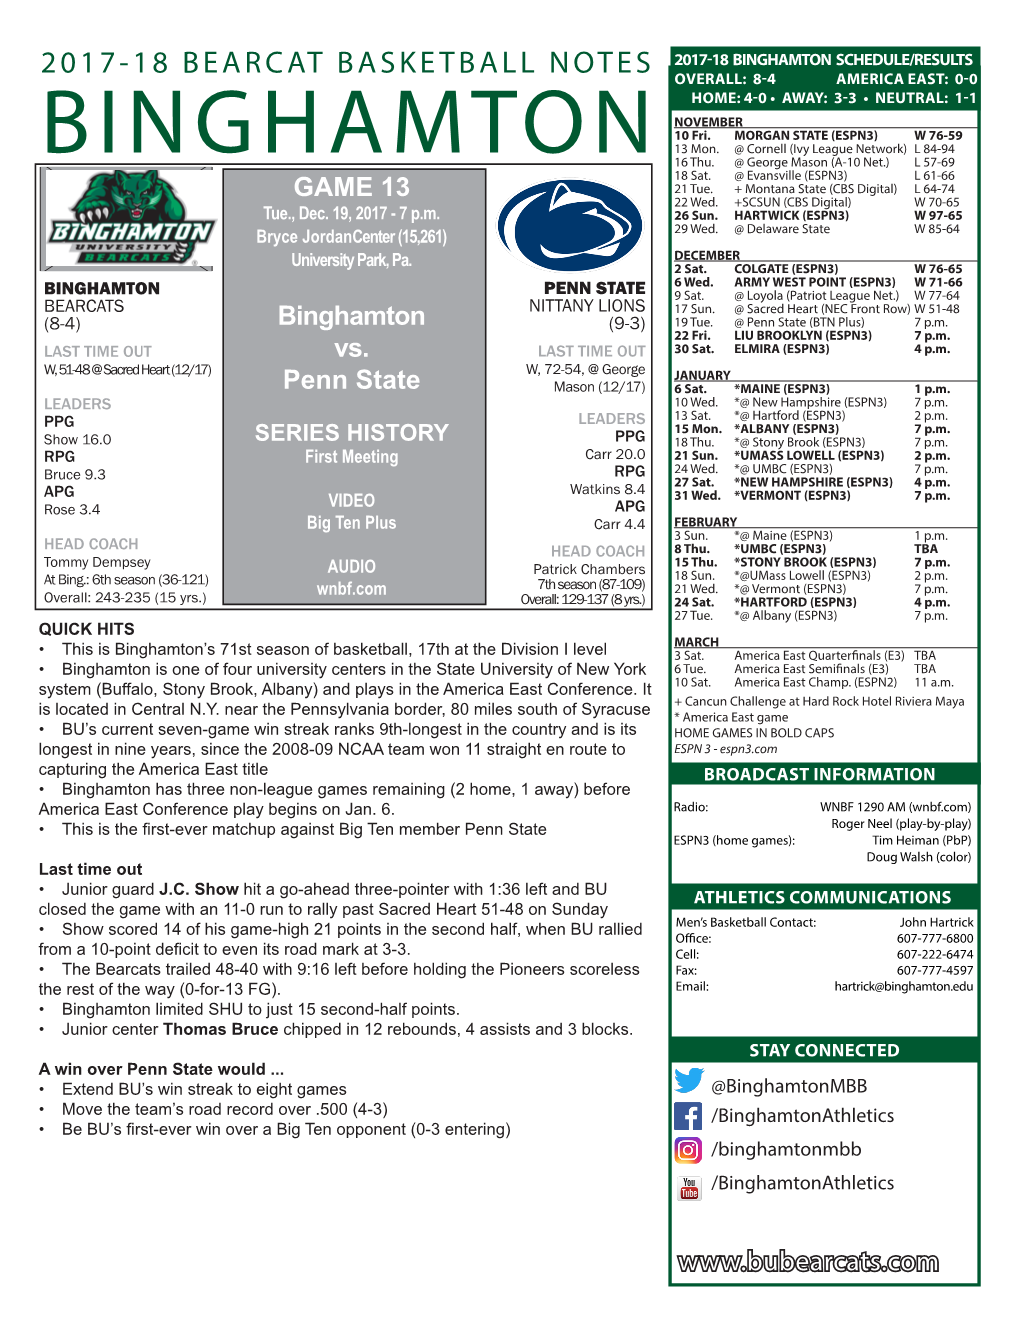 Binghamton Schedule/Results 2017-18 Bearcat Basketball Notes Overall: 8-4 America East: 0-0 Home: 4-0 • Away: 3-3 • Neutral: 1-1